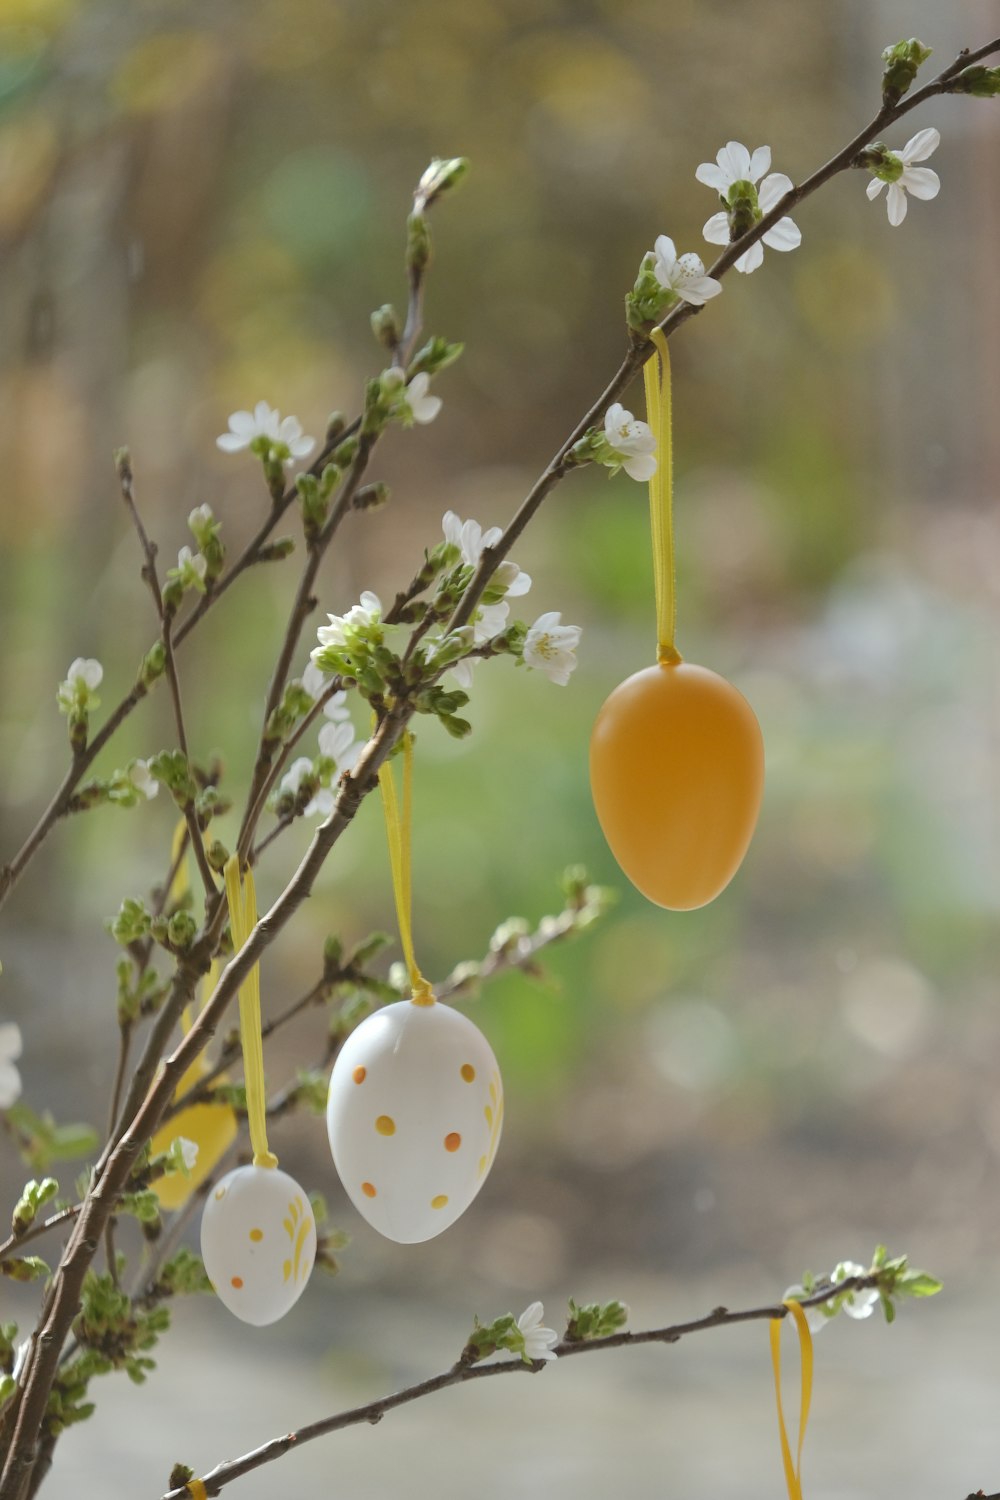 yellow and white round fruits on brown tree branch